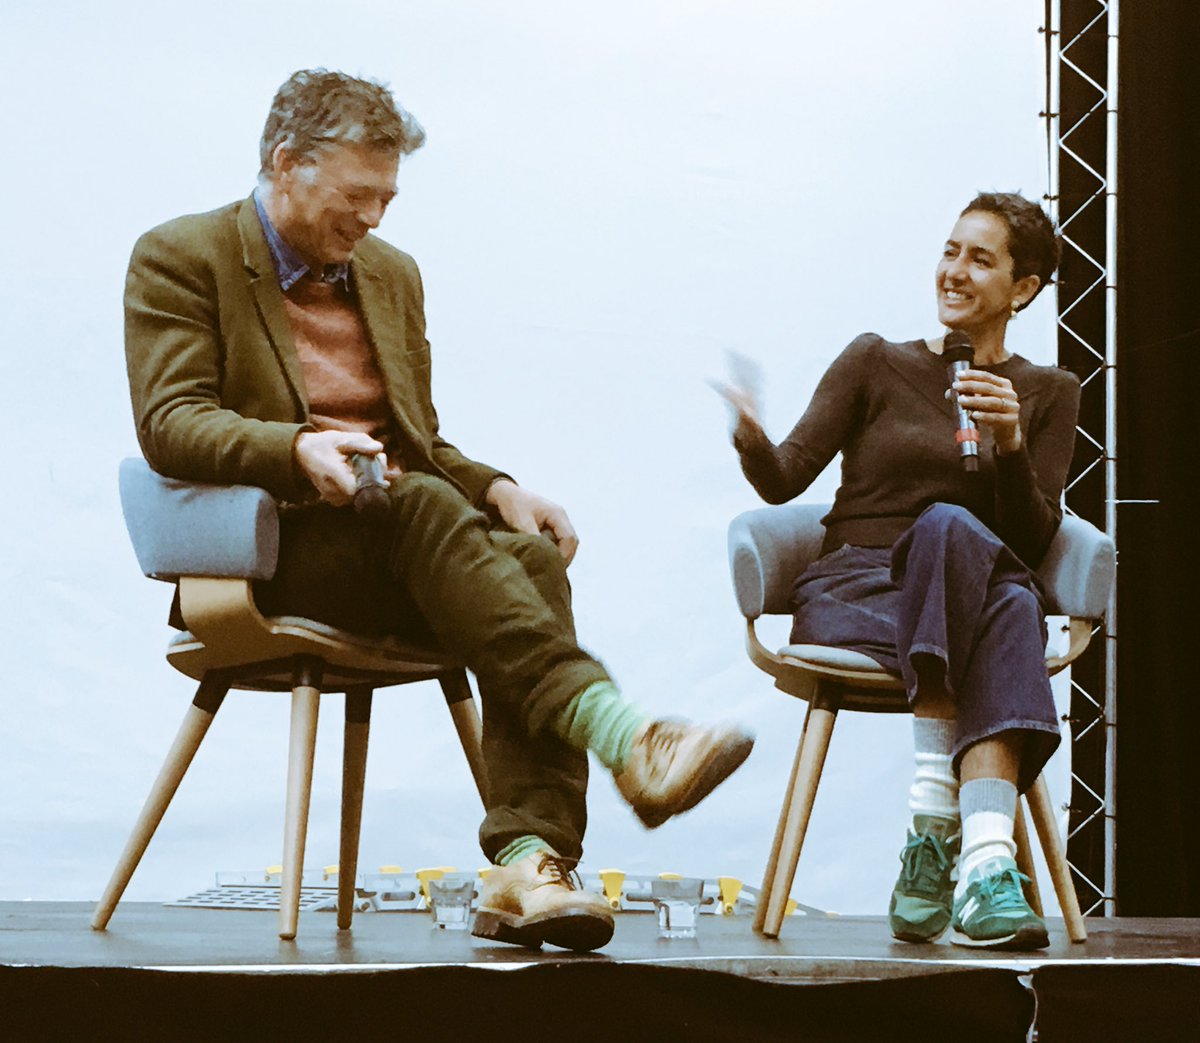 Loved our #studenteats conference today! So honoured to spend time with the inspirational duo Geetie and Guy Singh-Watson who discussed #sustainable #food issues from nationalising supermarkets to scaling businesses whilst retaining values. @geetiesingh @Riverford #organic